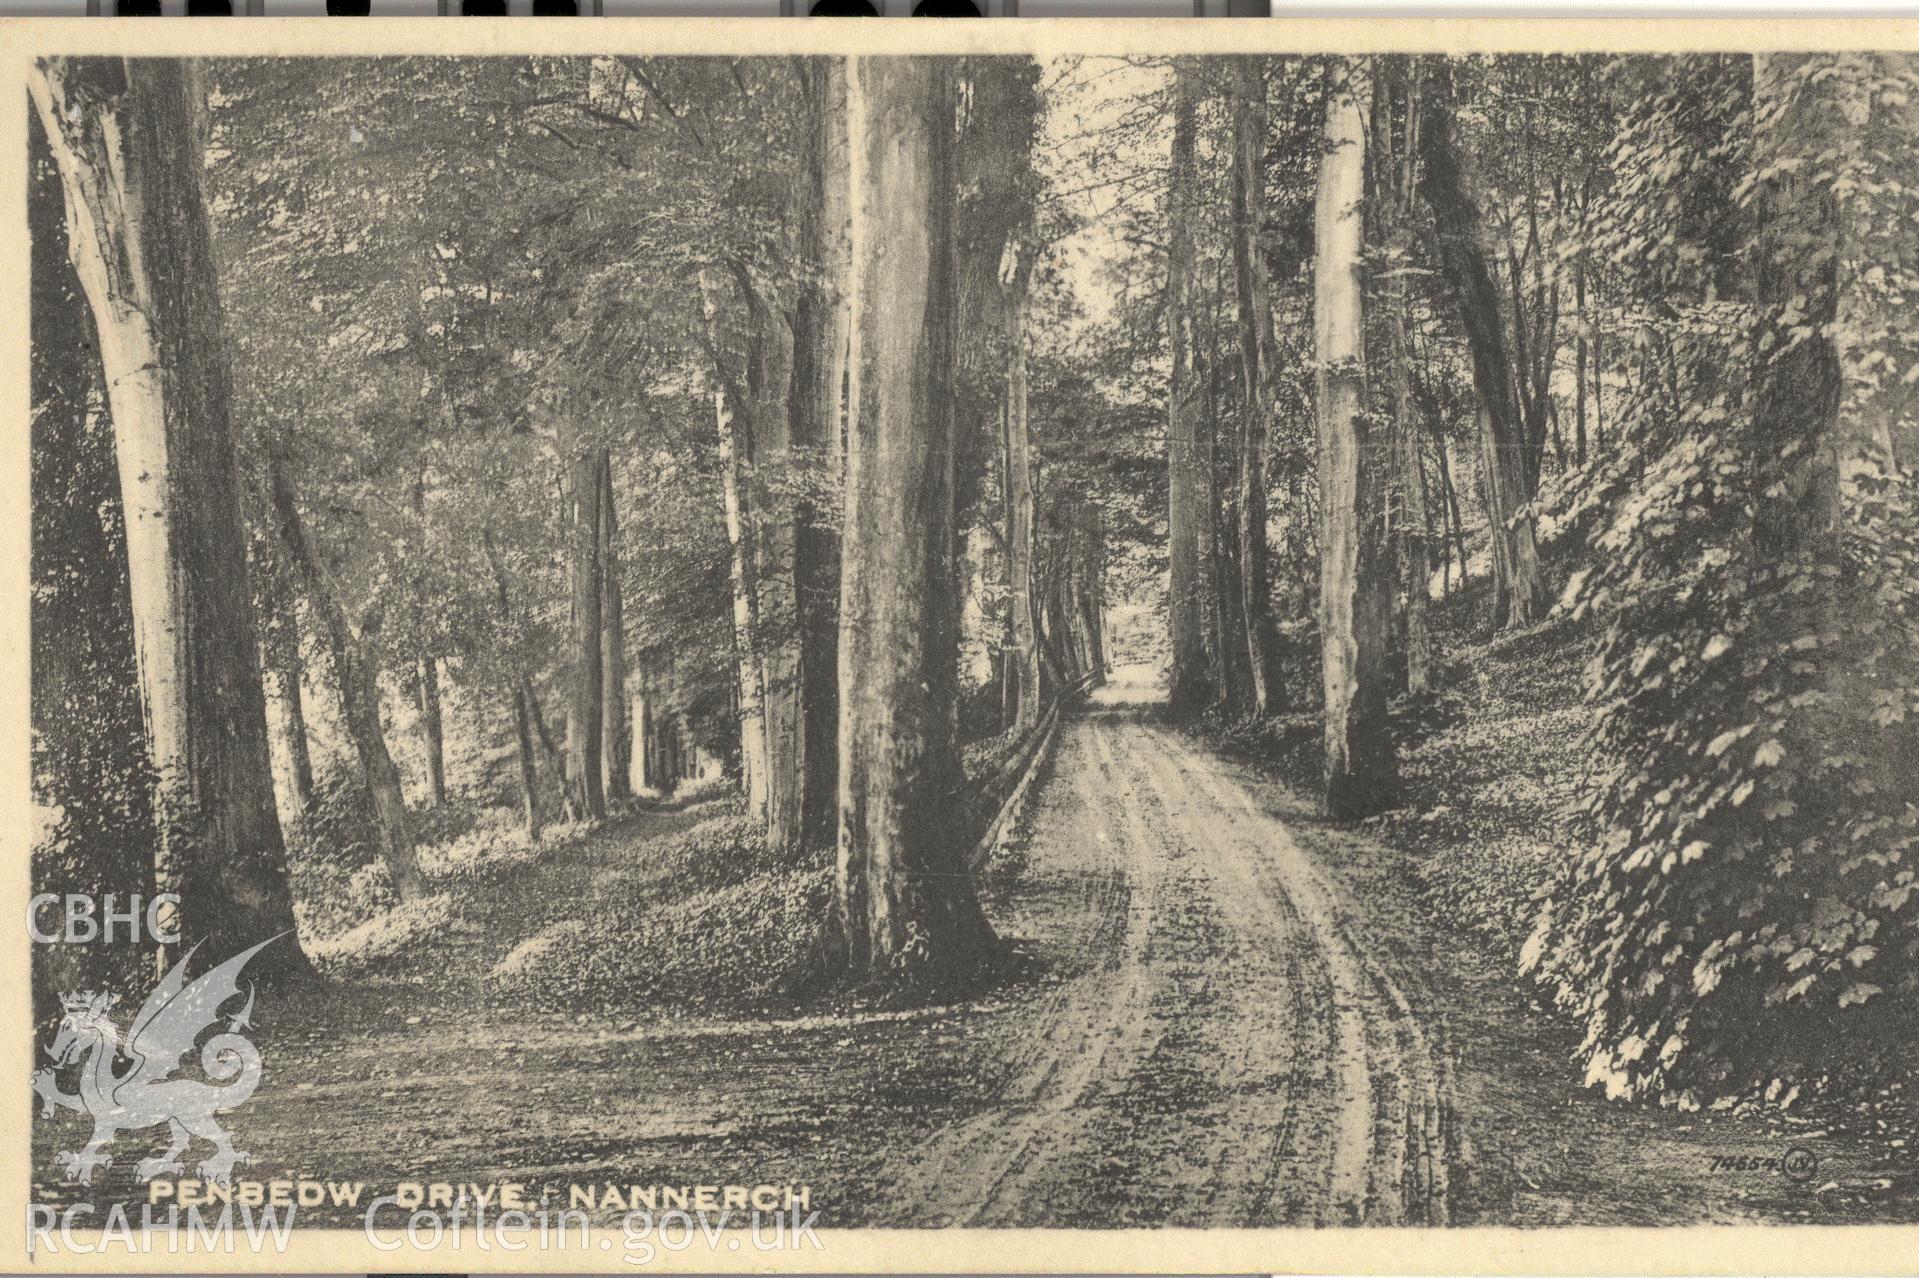 Digitised postcard image of Penbedw Drive, Nannerch, Valentine's "Bromotype" series. Produced by Parks and Gardens Data Services, from an original item in the Peter Davis Collection at Parks and Gardens UK. We hold only web-resolution images of this collection, suitable for viewing on screen and for research purposes only. We do not hold the original images, or publication quality scans.